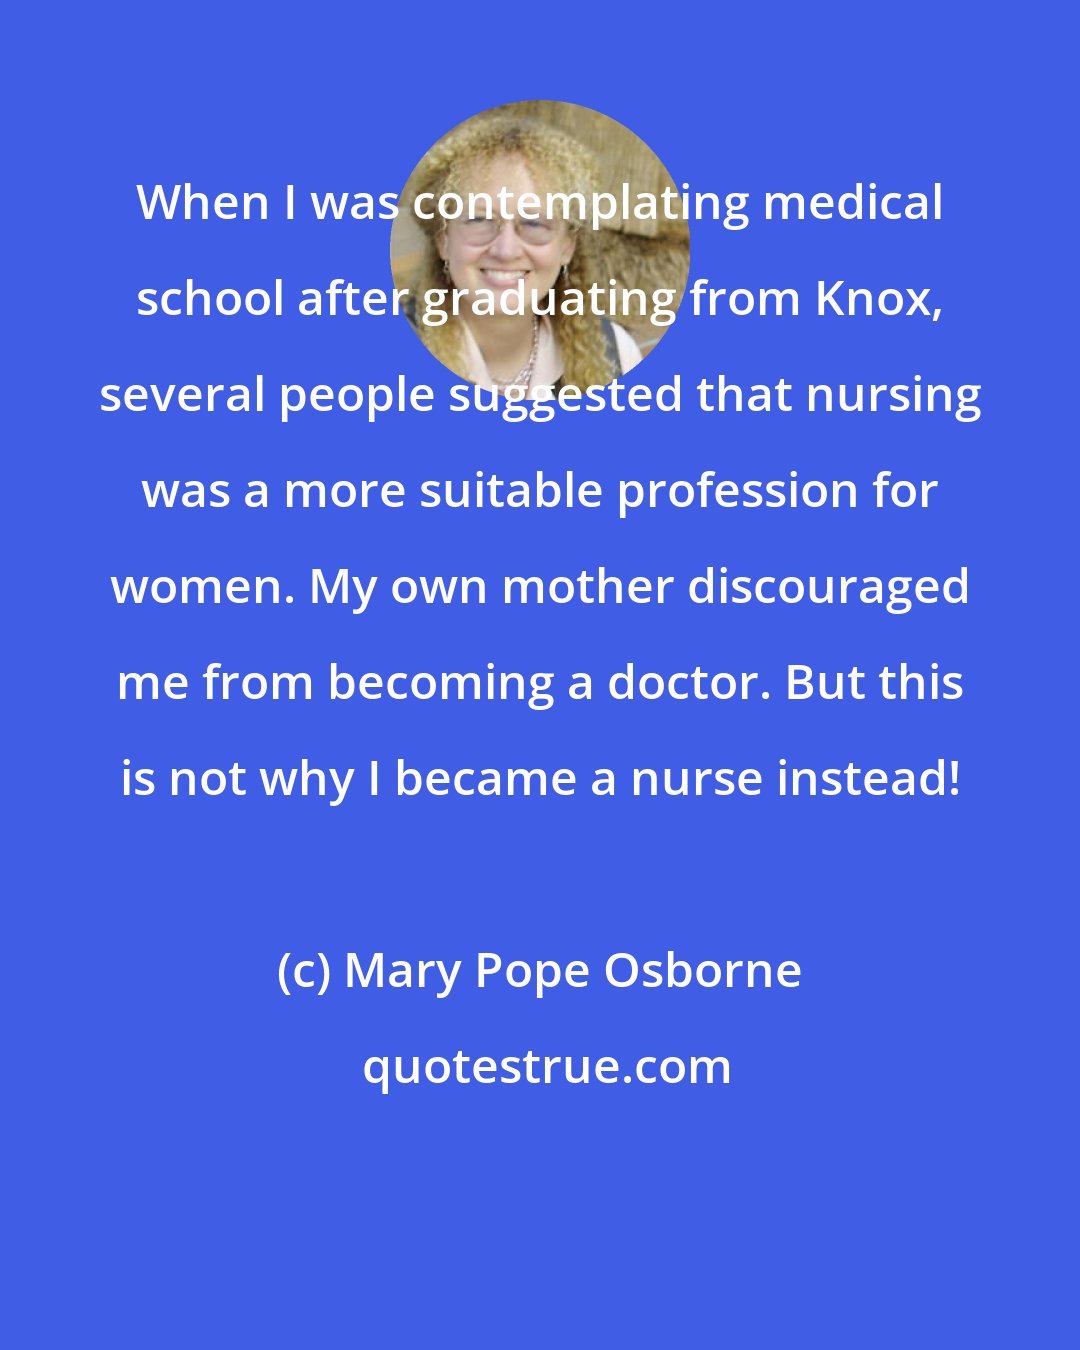 Mary Pope Osborne: When I was contemplating medical school after graduating from Knox, several people suggested that nursing was a more suitable profession for women. My own mother discouraged me from becoming a doctor. But this is not why I became a nurse instead!